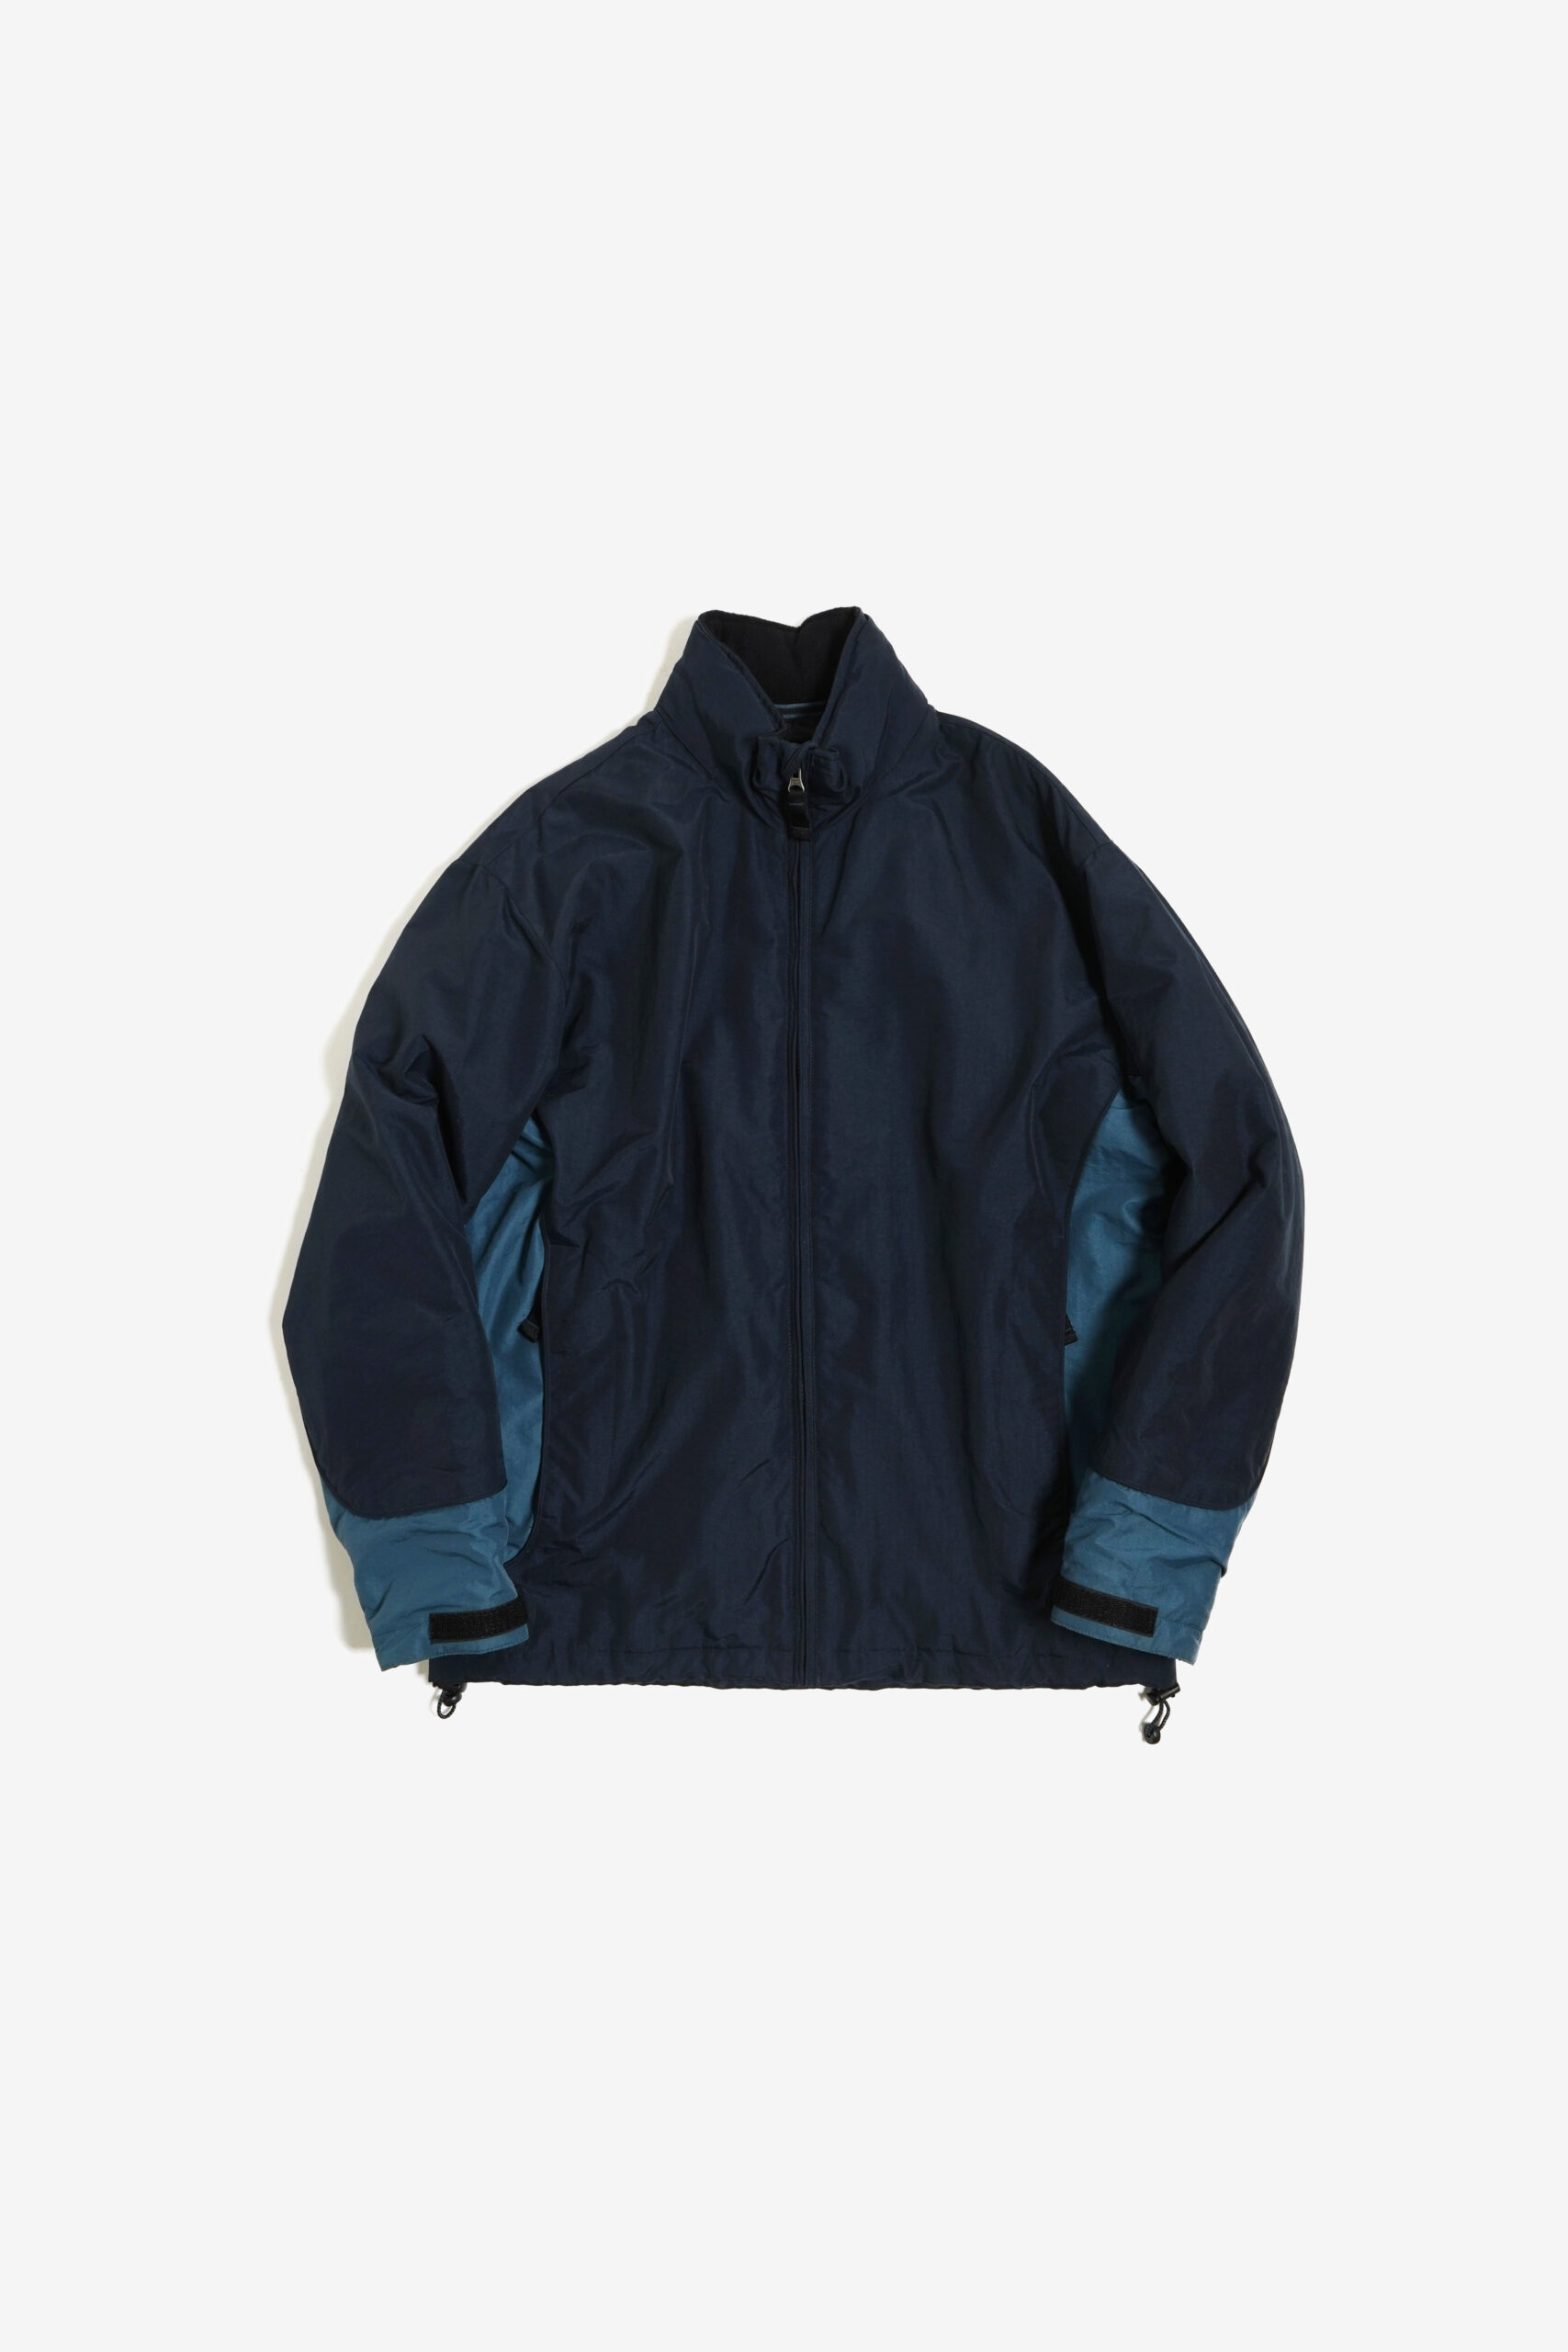 OLD GAP PUFFING JACKET NAVY BLUE